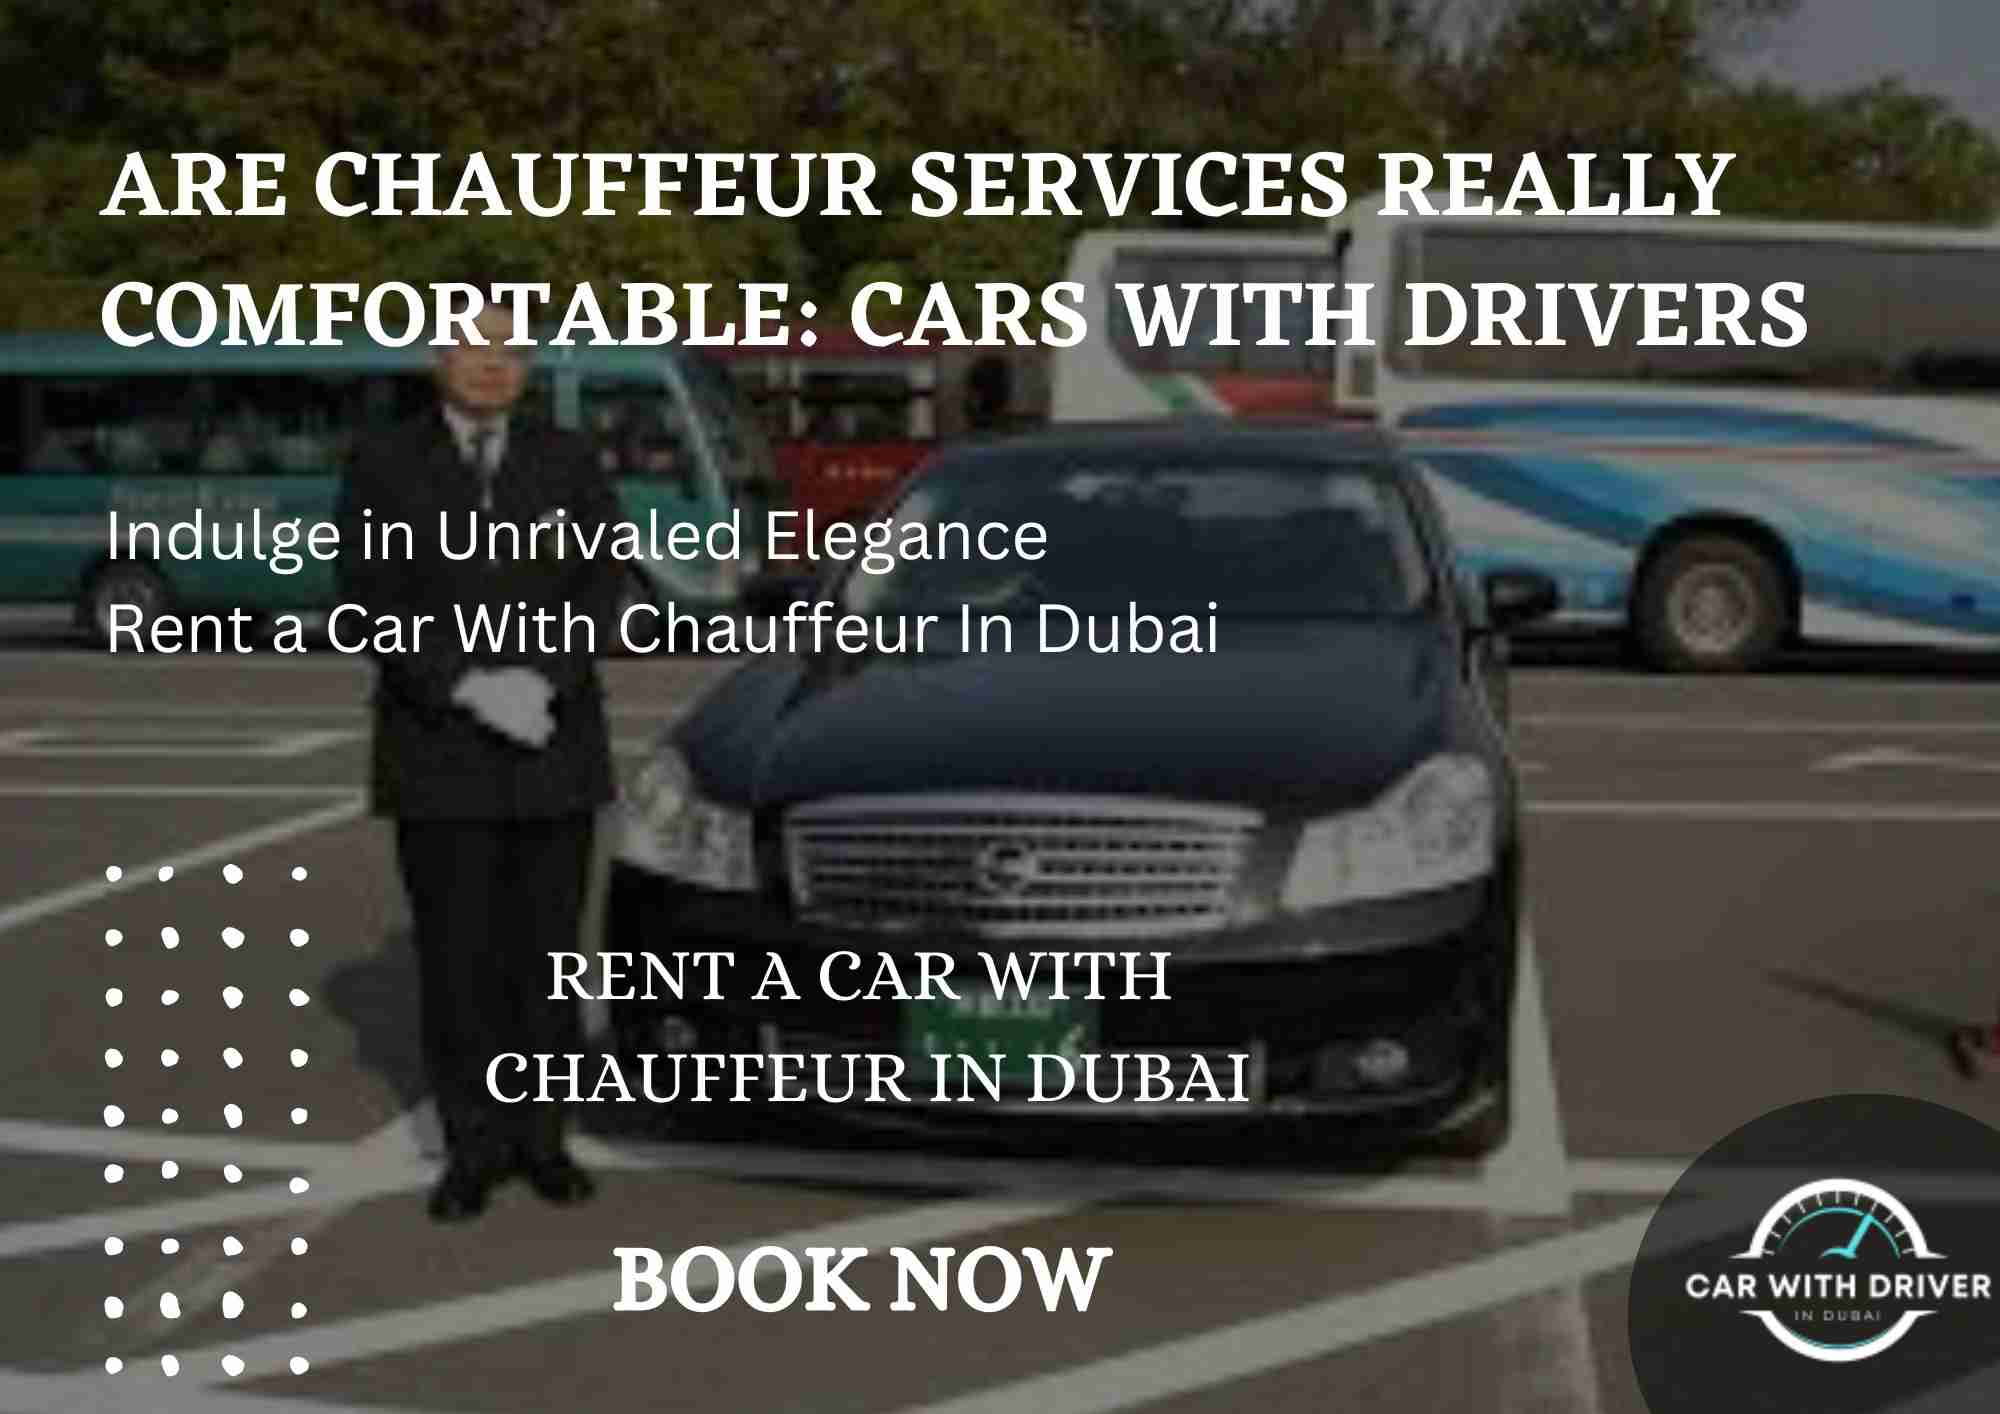 You are currently viewing Are Chauffeur Services Really Comfortable: Cars with Drivers